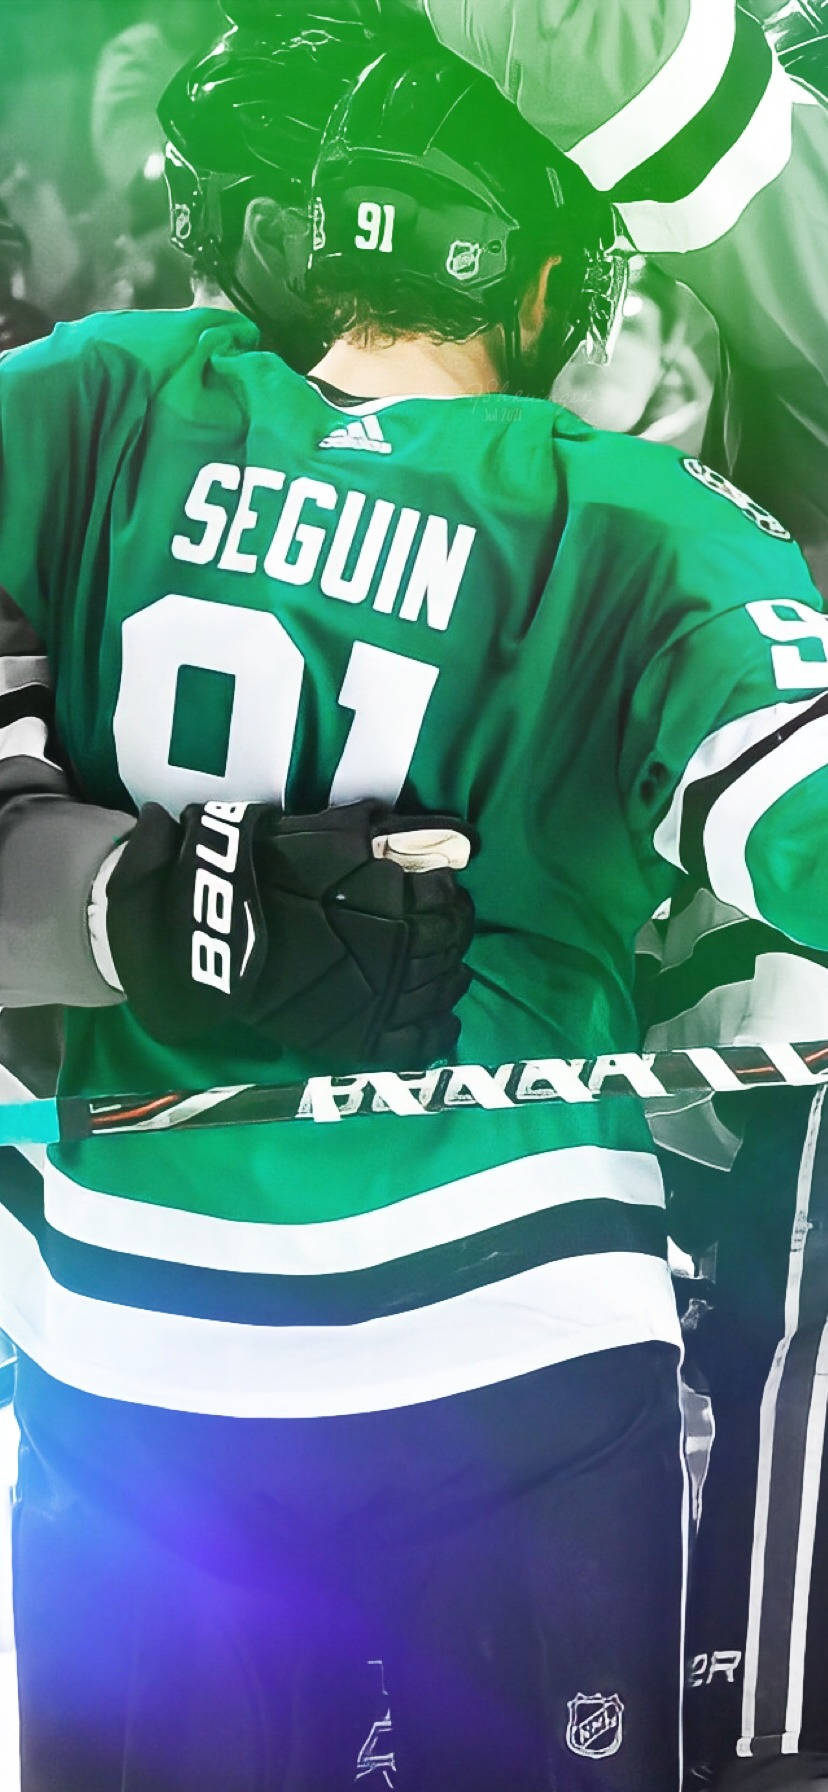 Tylerseguin Dallas Stars Bakifrån Kram Betraktning. (this Would Make Sense As A Description For A Computer Or Mobile Wallpaper Featuring An Image Of Tyler Seguin From Behind With Someone Hugging Him, Possibly A Teammate Or Fan.) Wallpaper